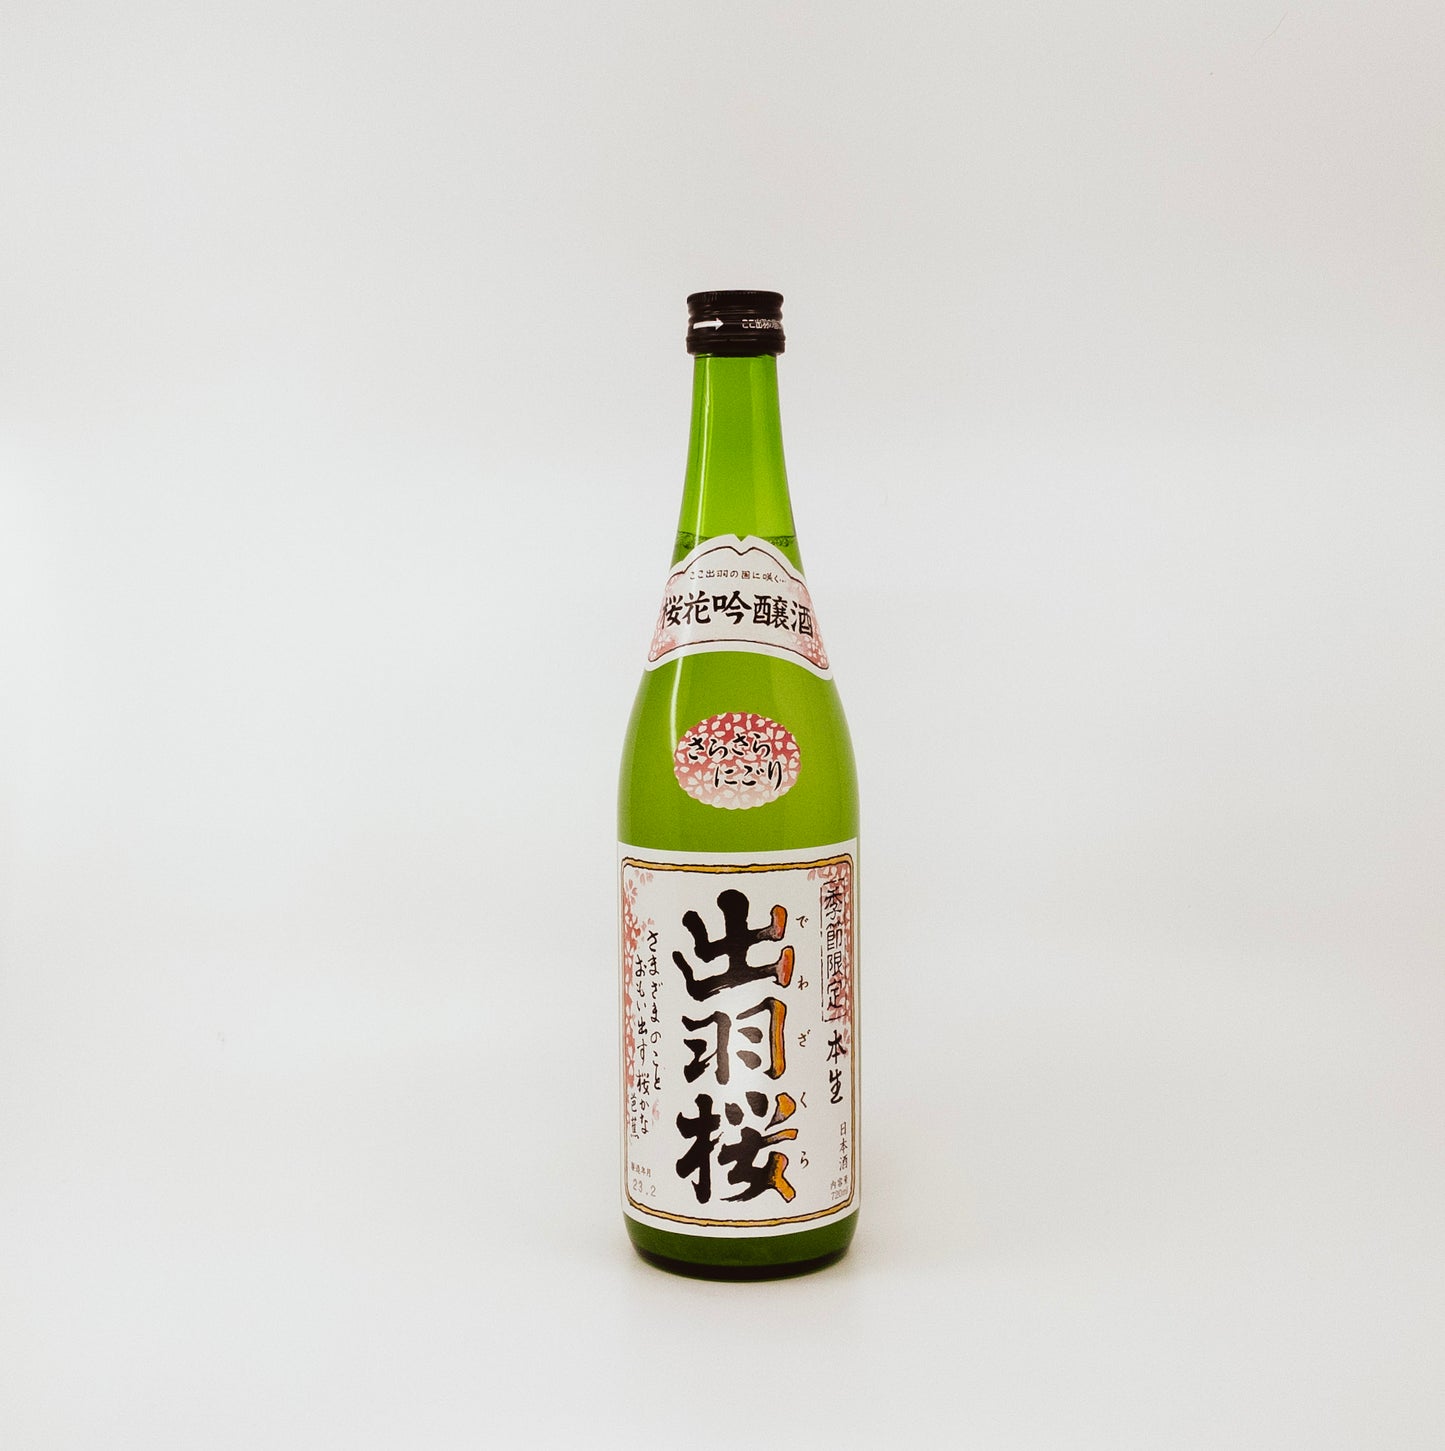 green bottle with white label